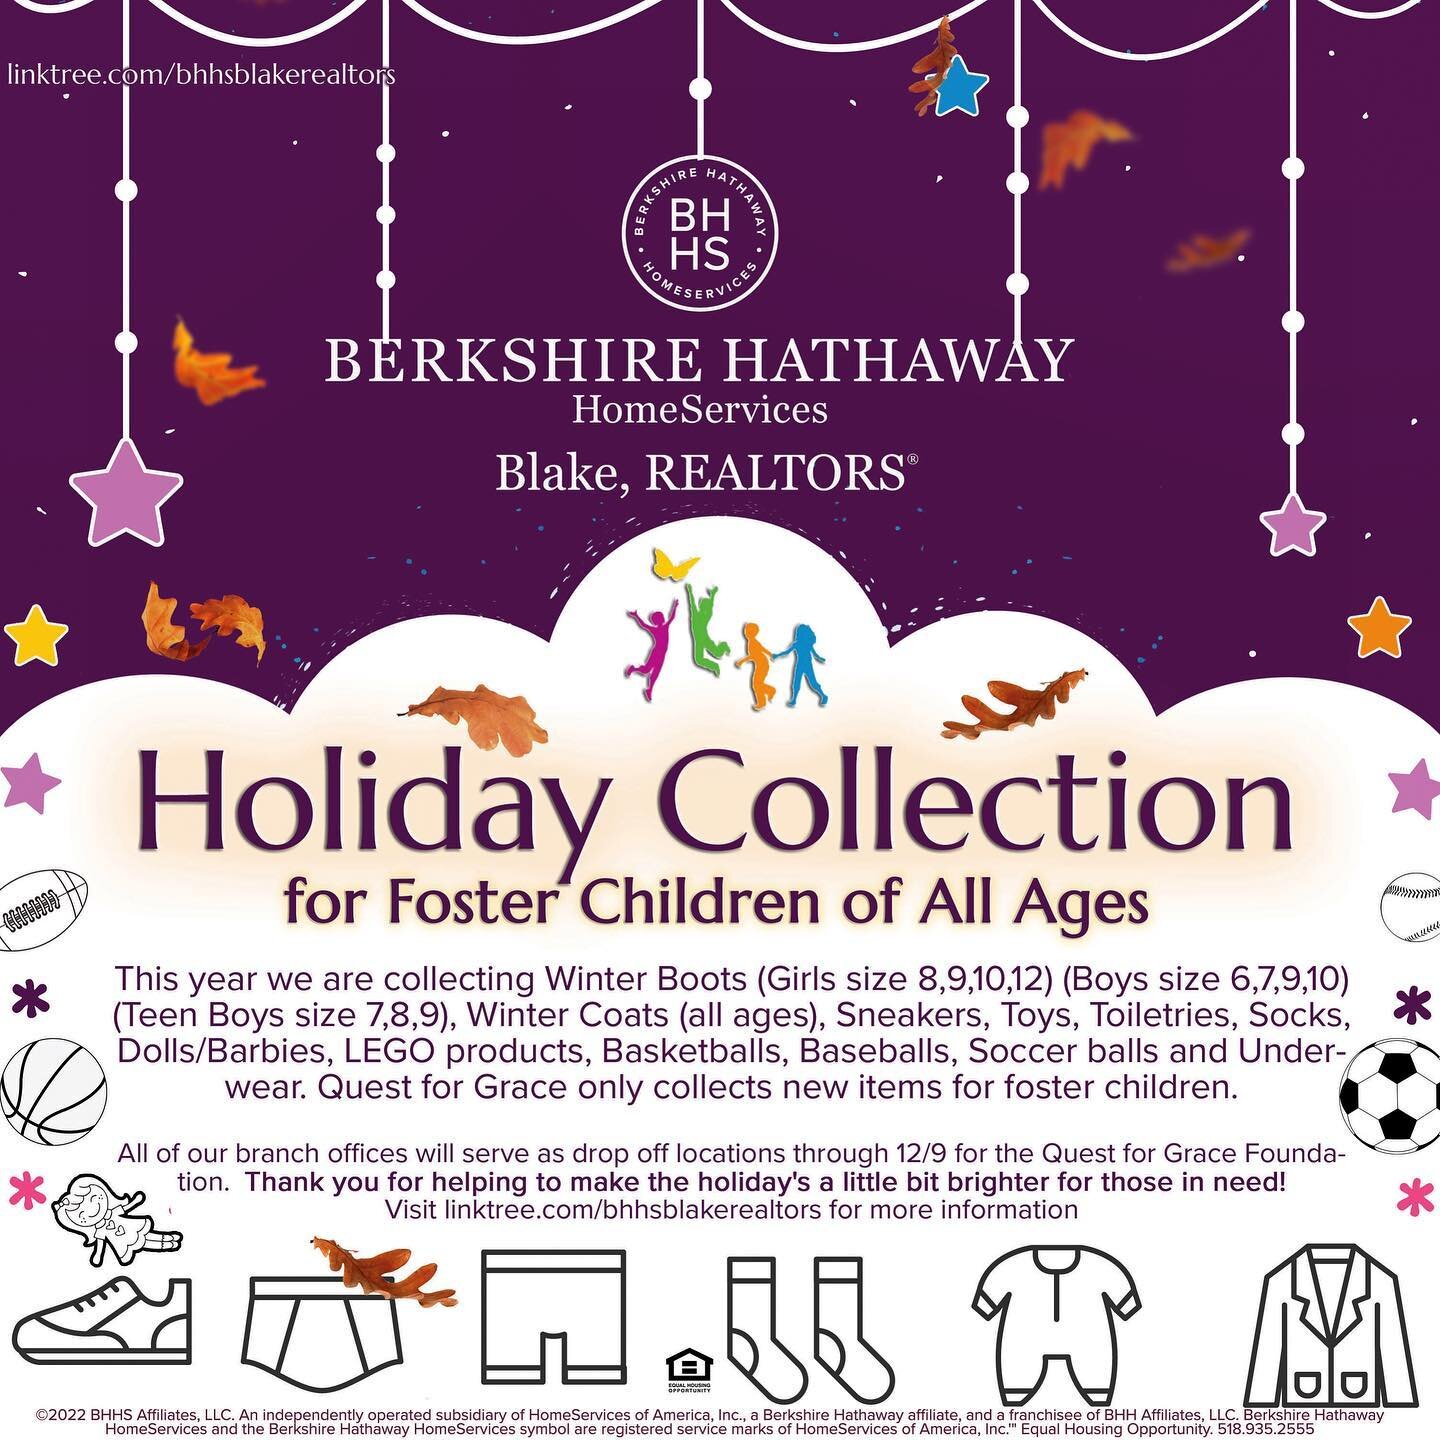 Our #holiday #collection for foster children has begun. All branch offices will serve as drop off locations through 12/12 this year. Follow link in bio for information about items we are collecting this year. #community #realtors #berkshirehathawayho